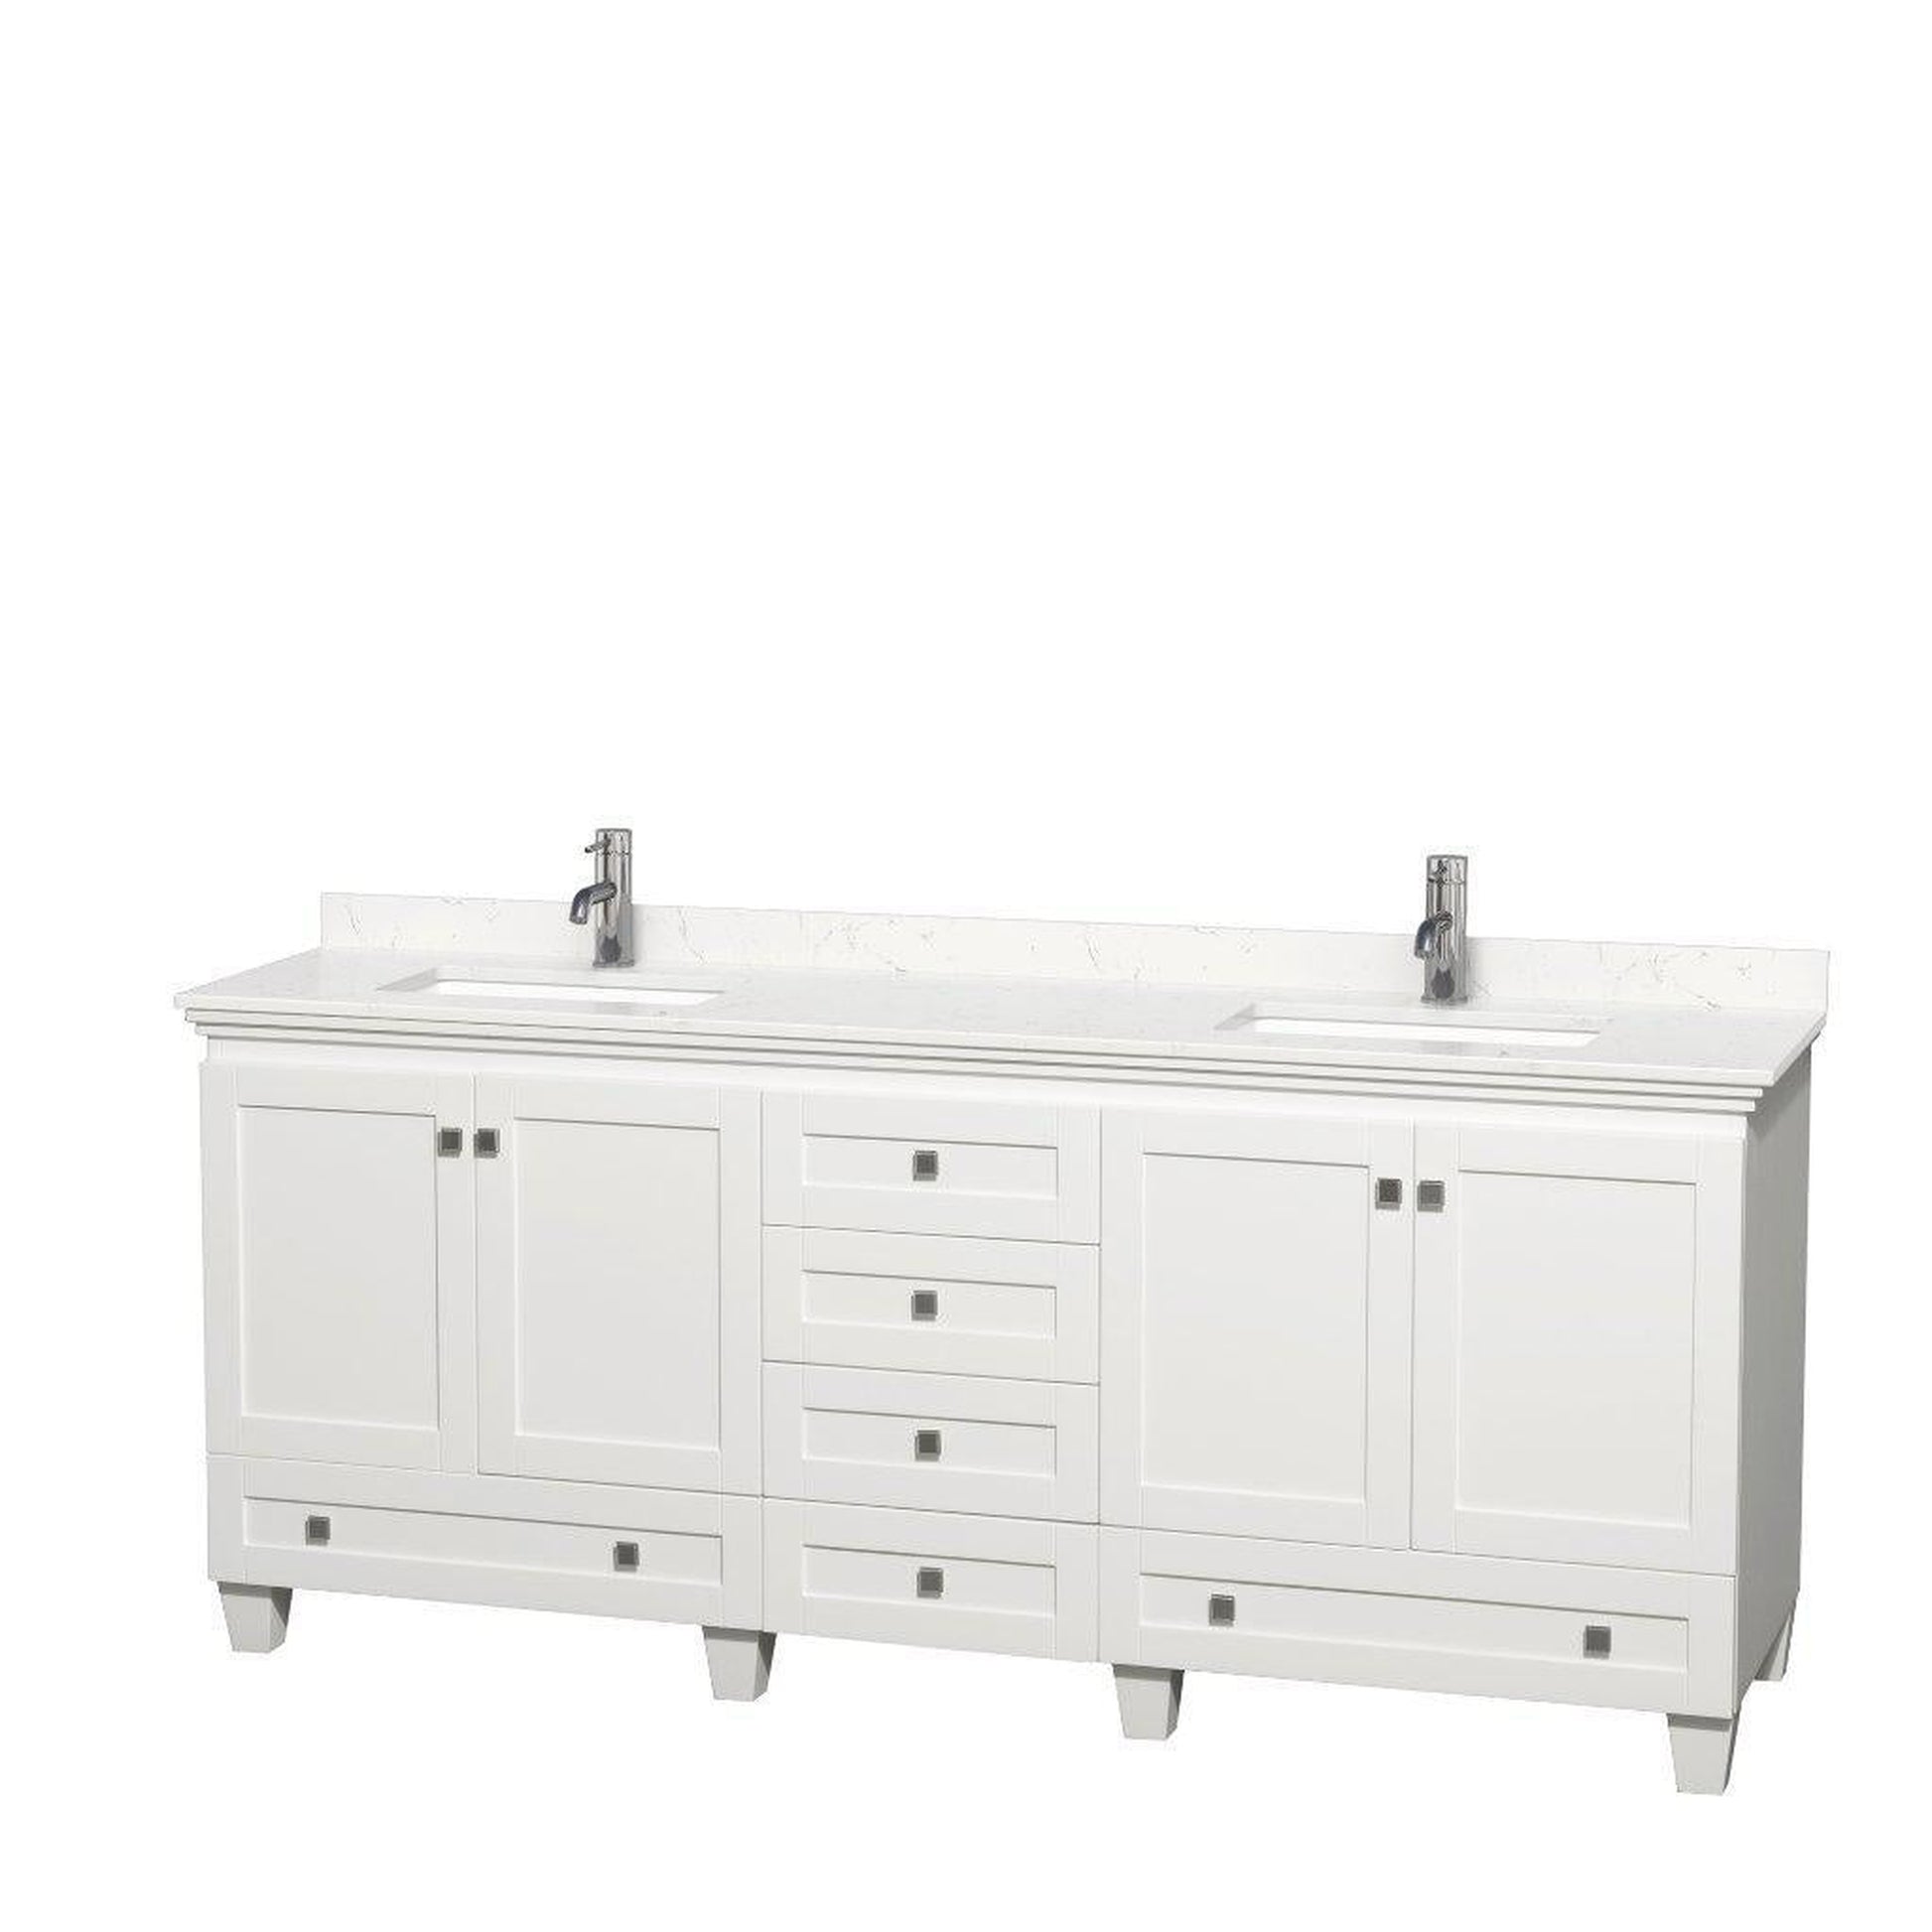 Wyndham Collection Acclaim 80" Double Bathroom White Vanity With Light-Vein Carrara Cultured Marble Countertop And Undermount Square Sinks